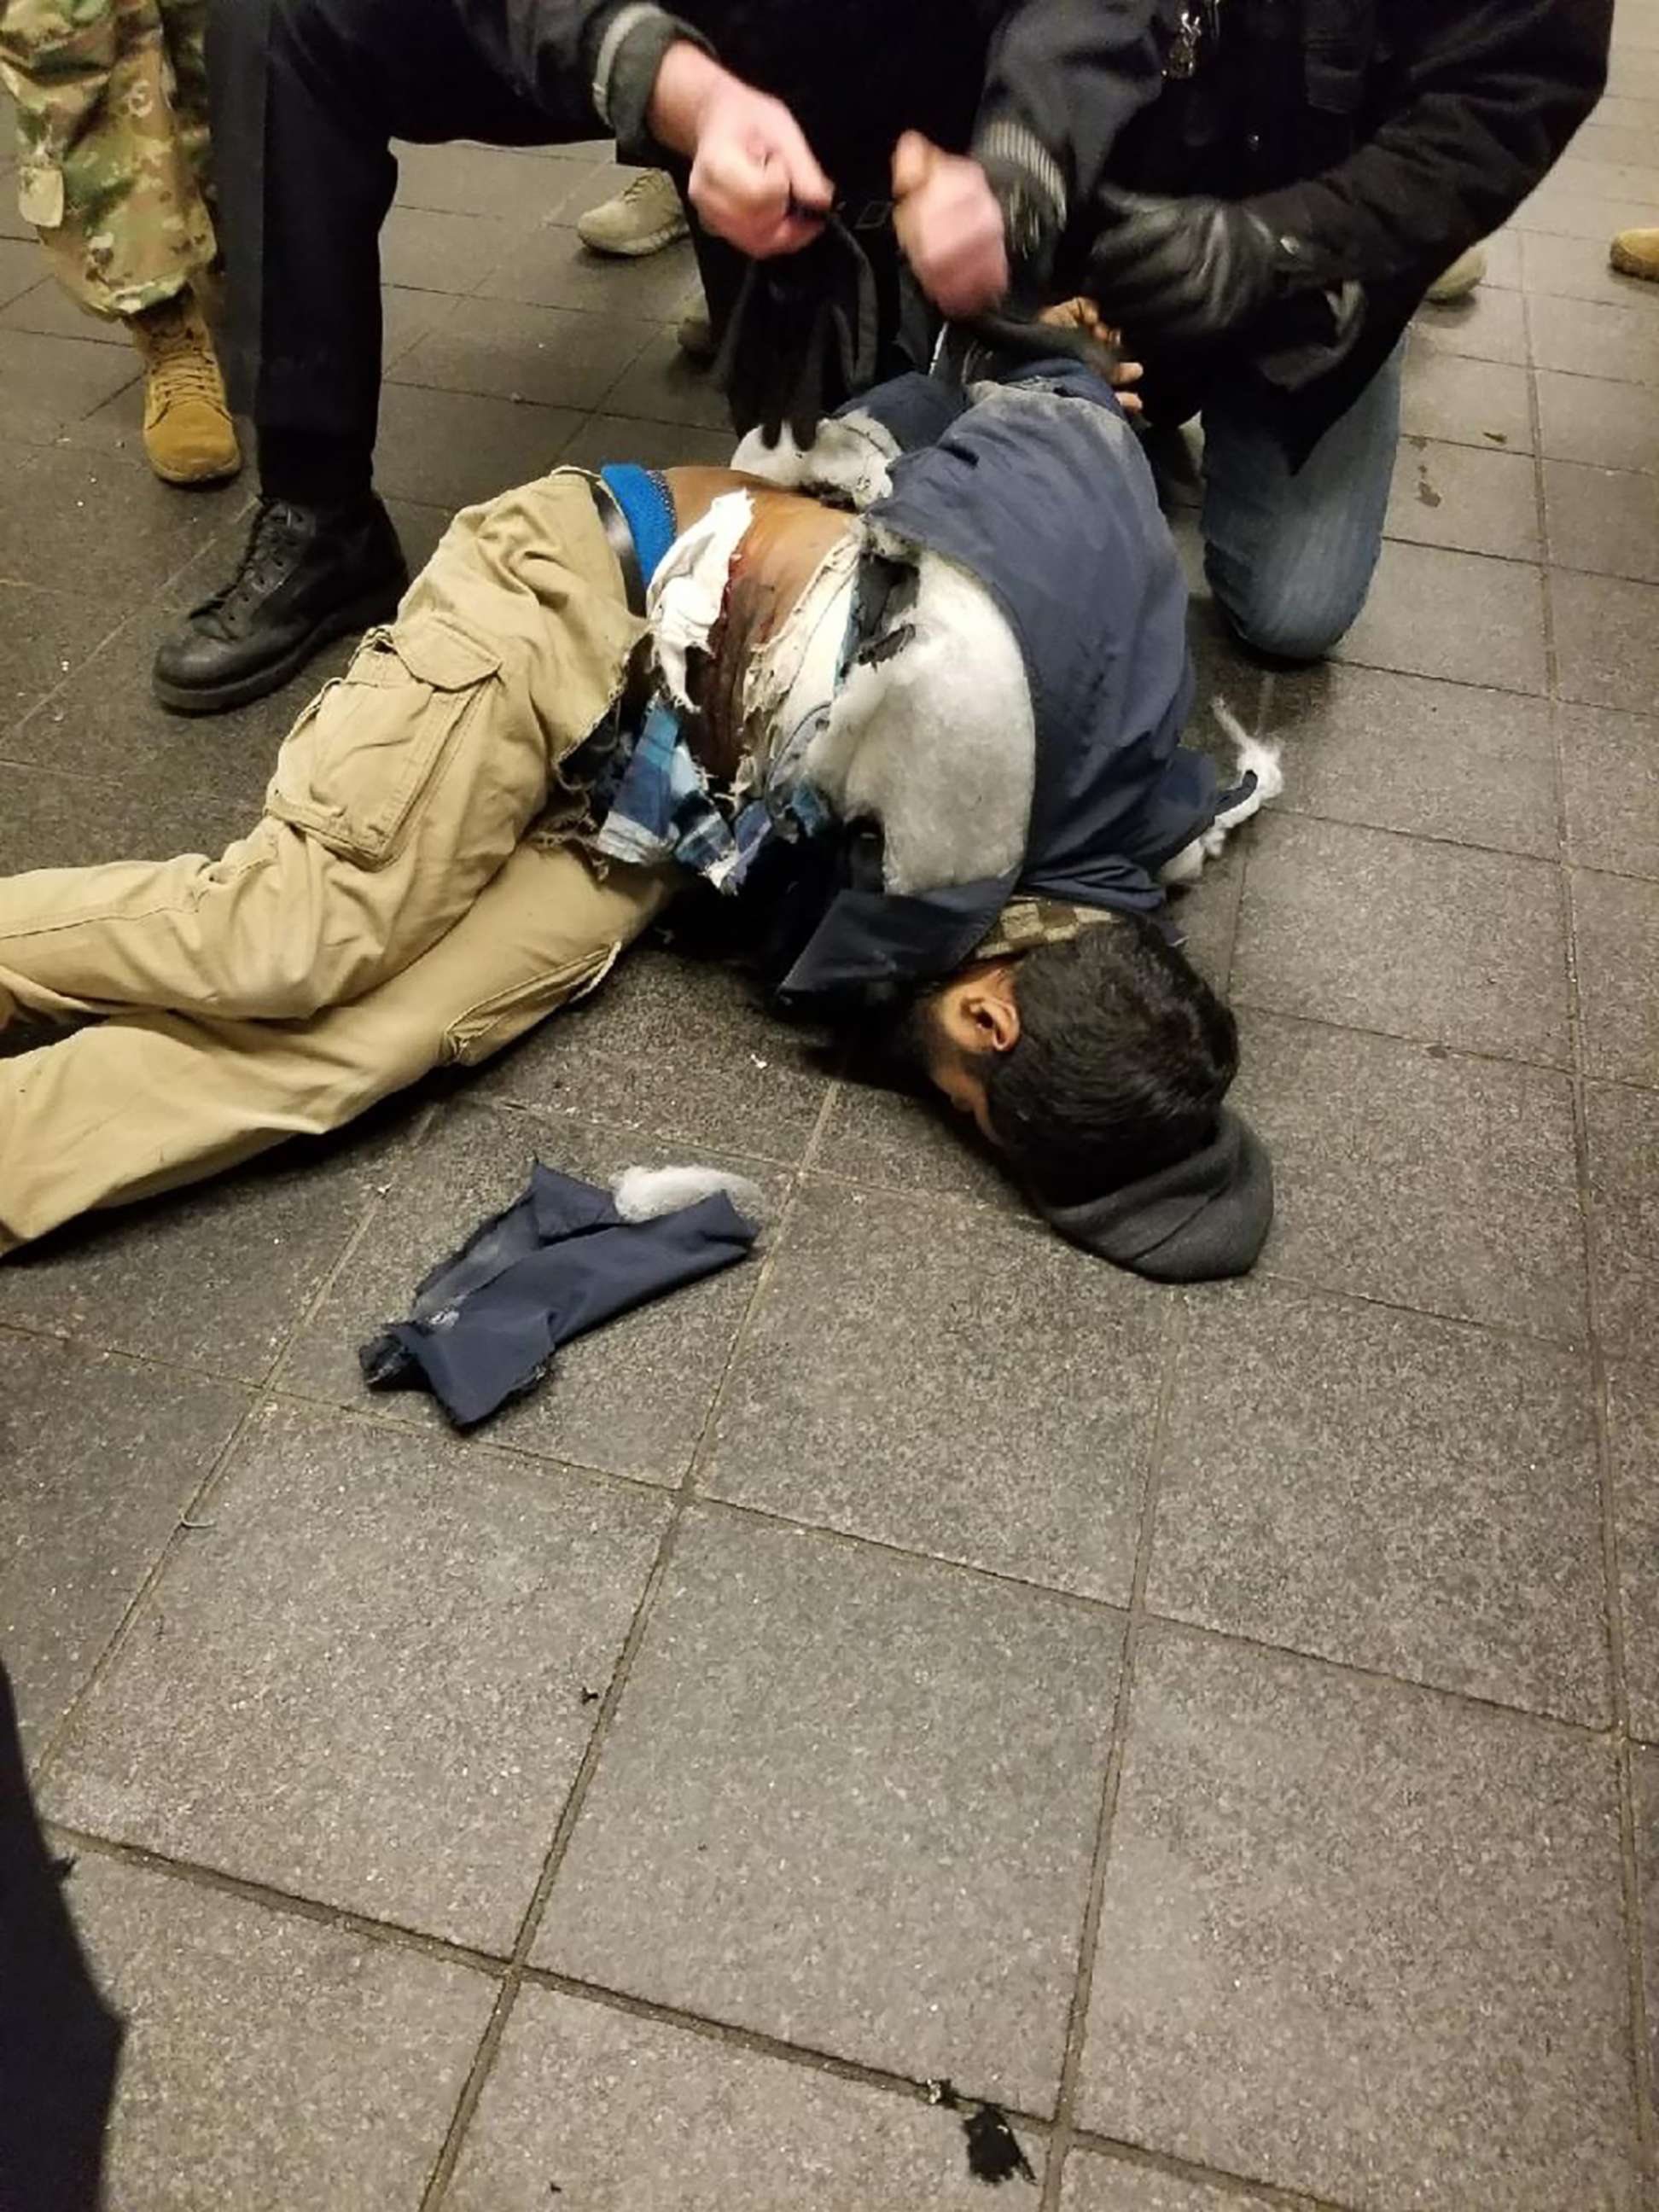 PHOTO: Police take down Akayed Ullah in New York in a photo widely shared on social media, Dec. 11, 2017. 